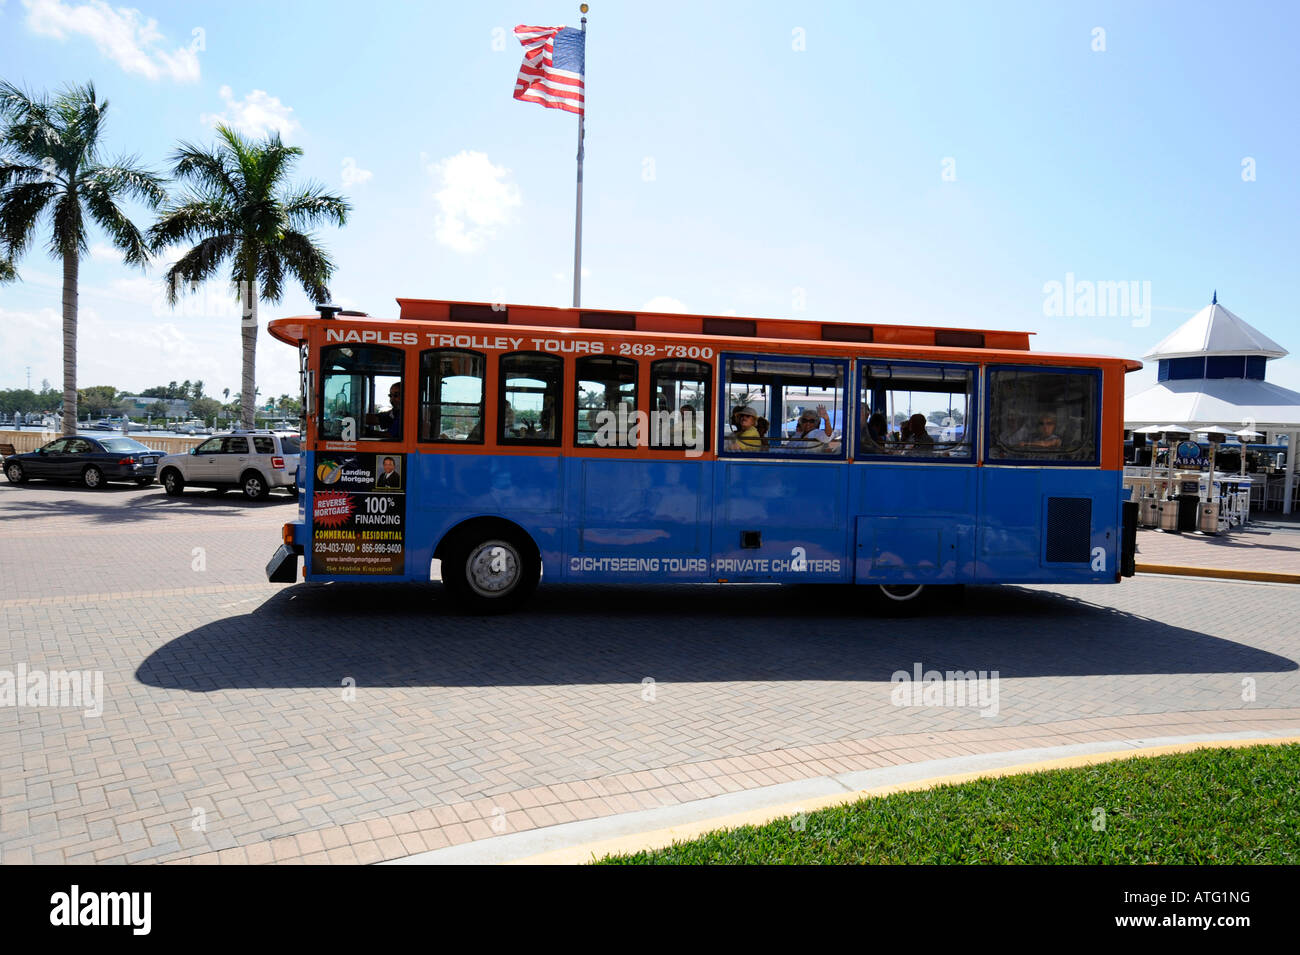 Naples Florida Bayfront Shopping and Residential District trolley tour  Stock Photo - Alamy